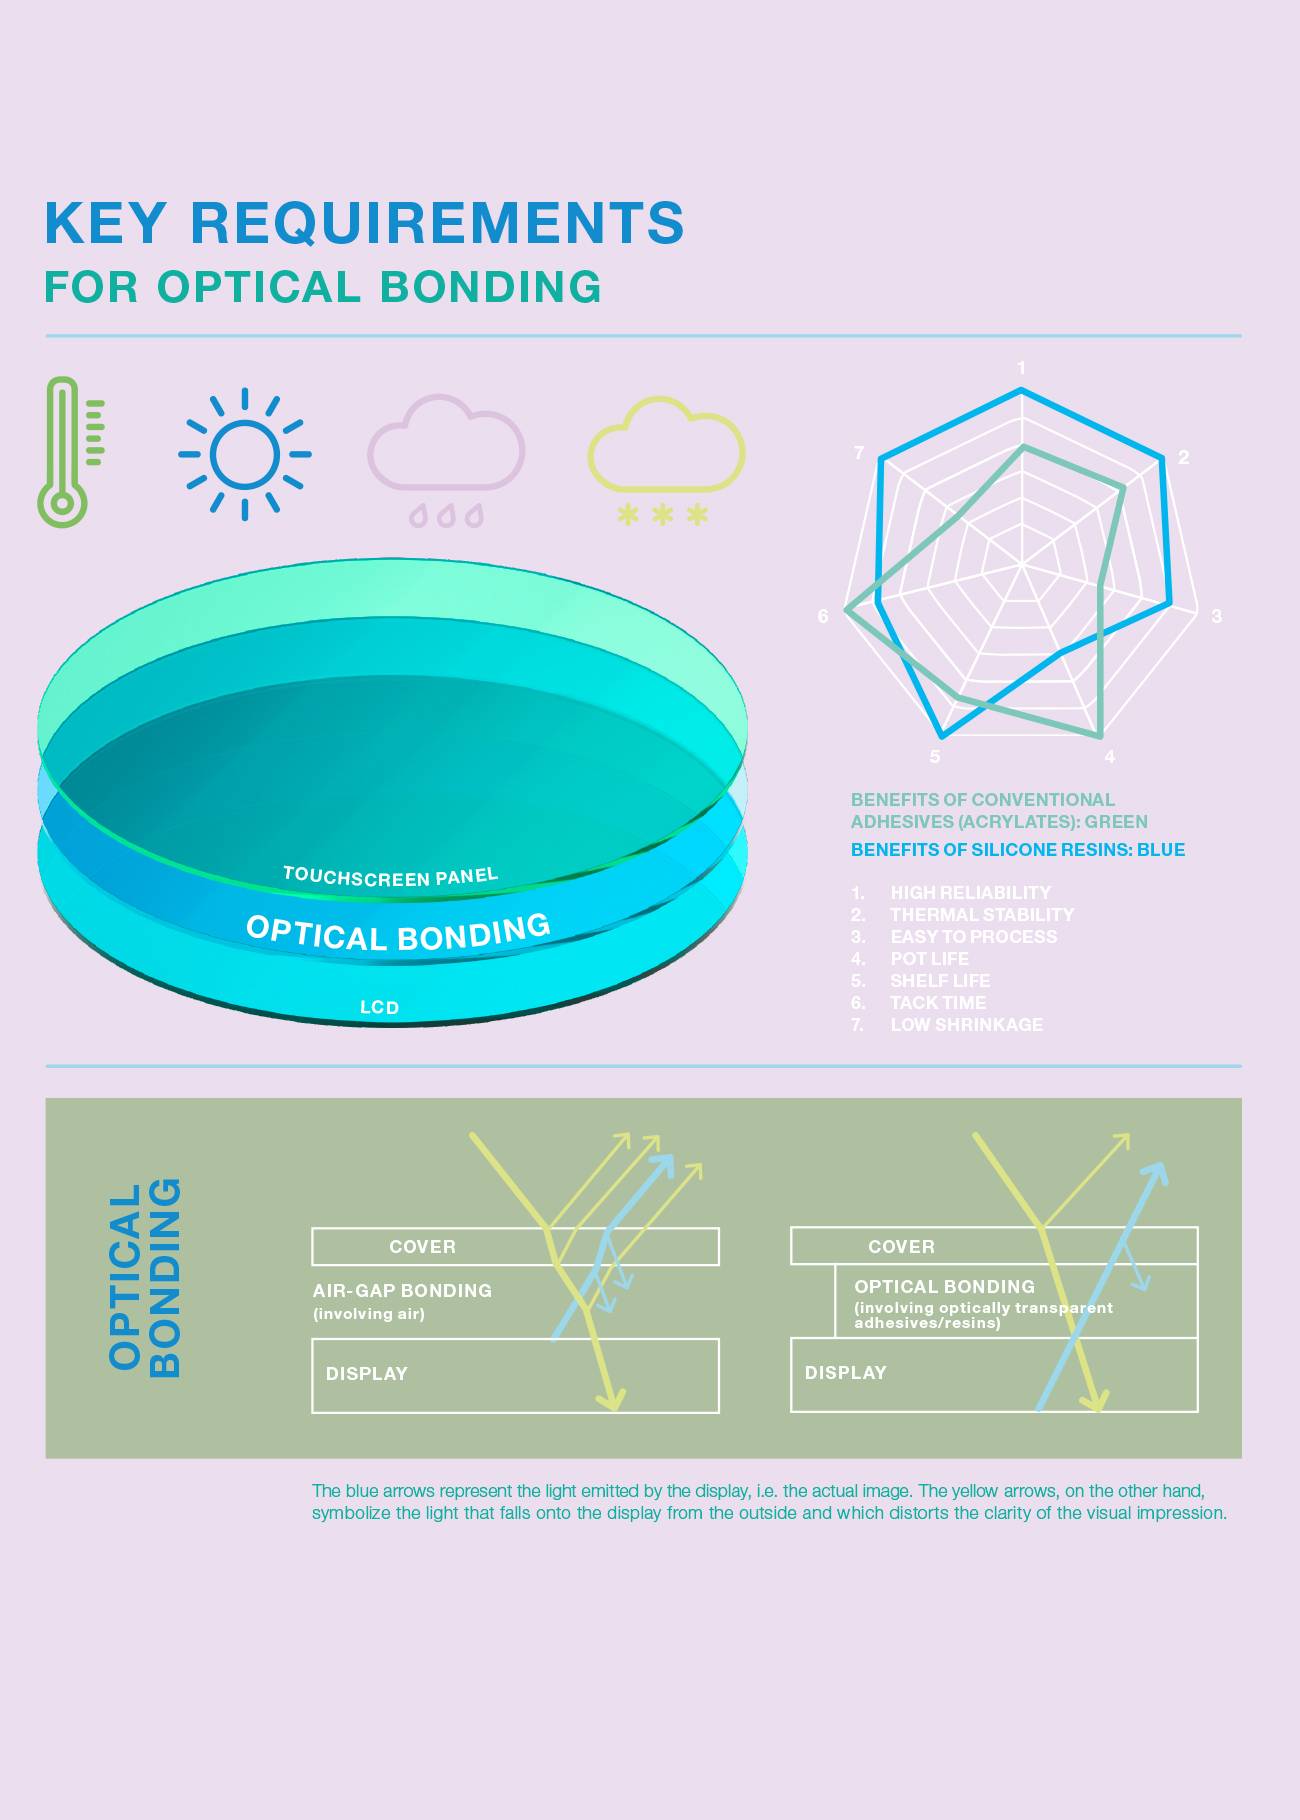 Key Requirements for Optical Bonding